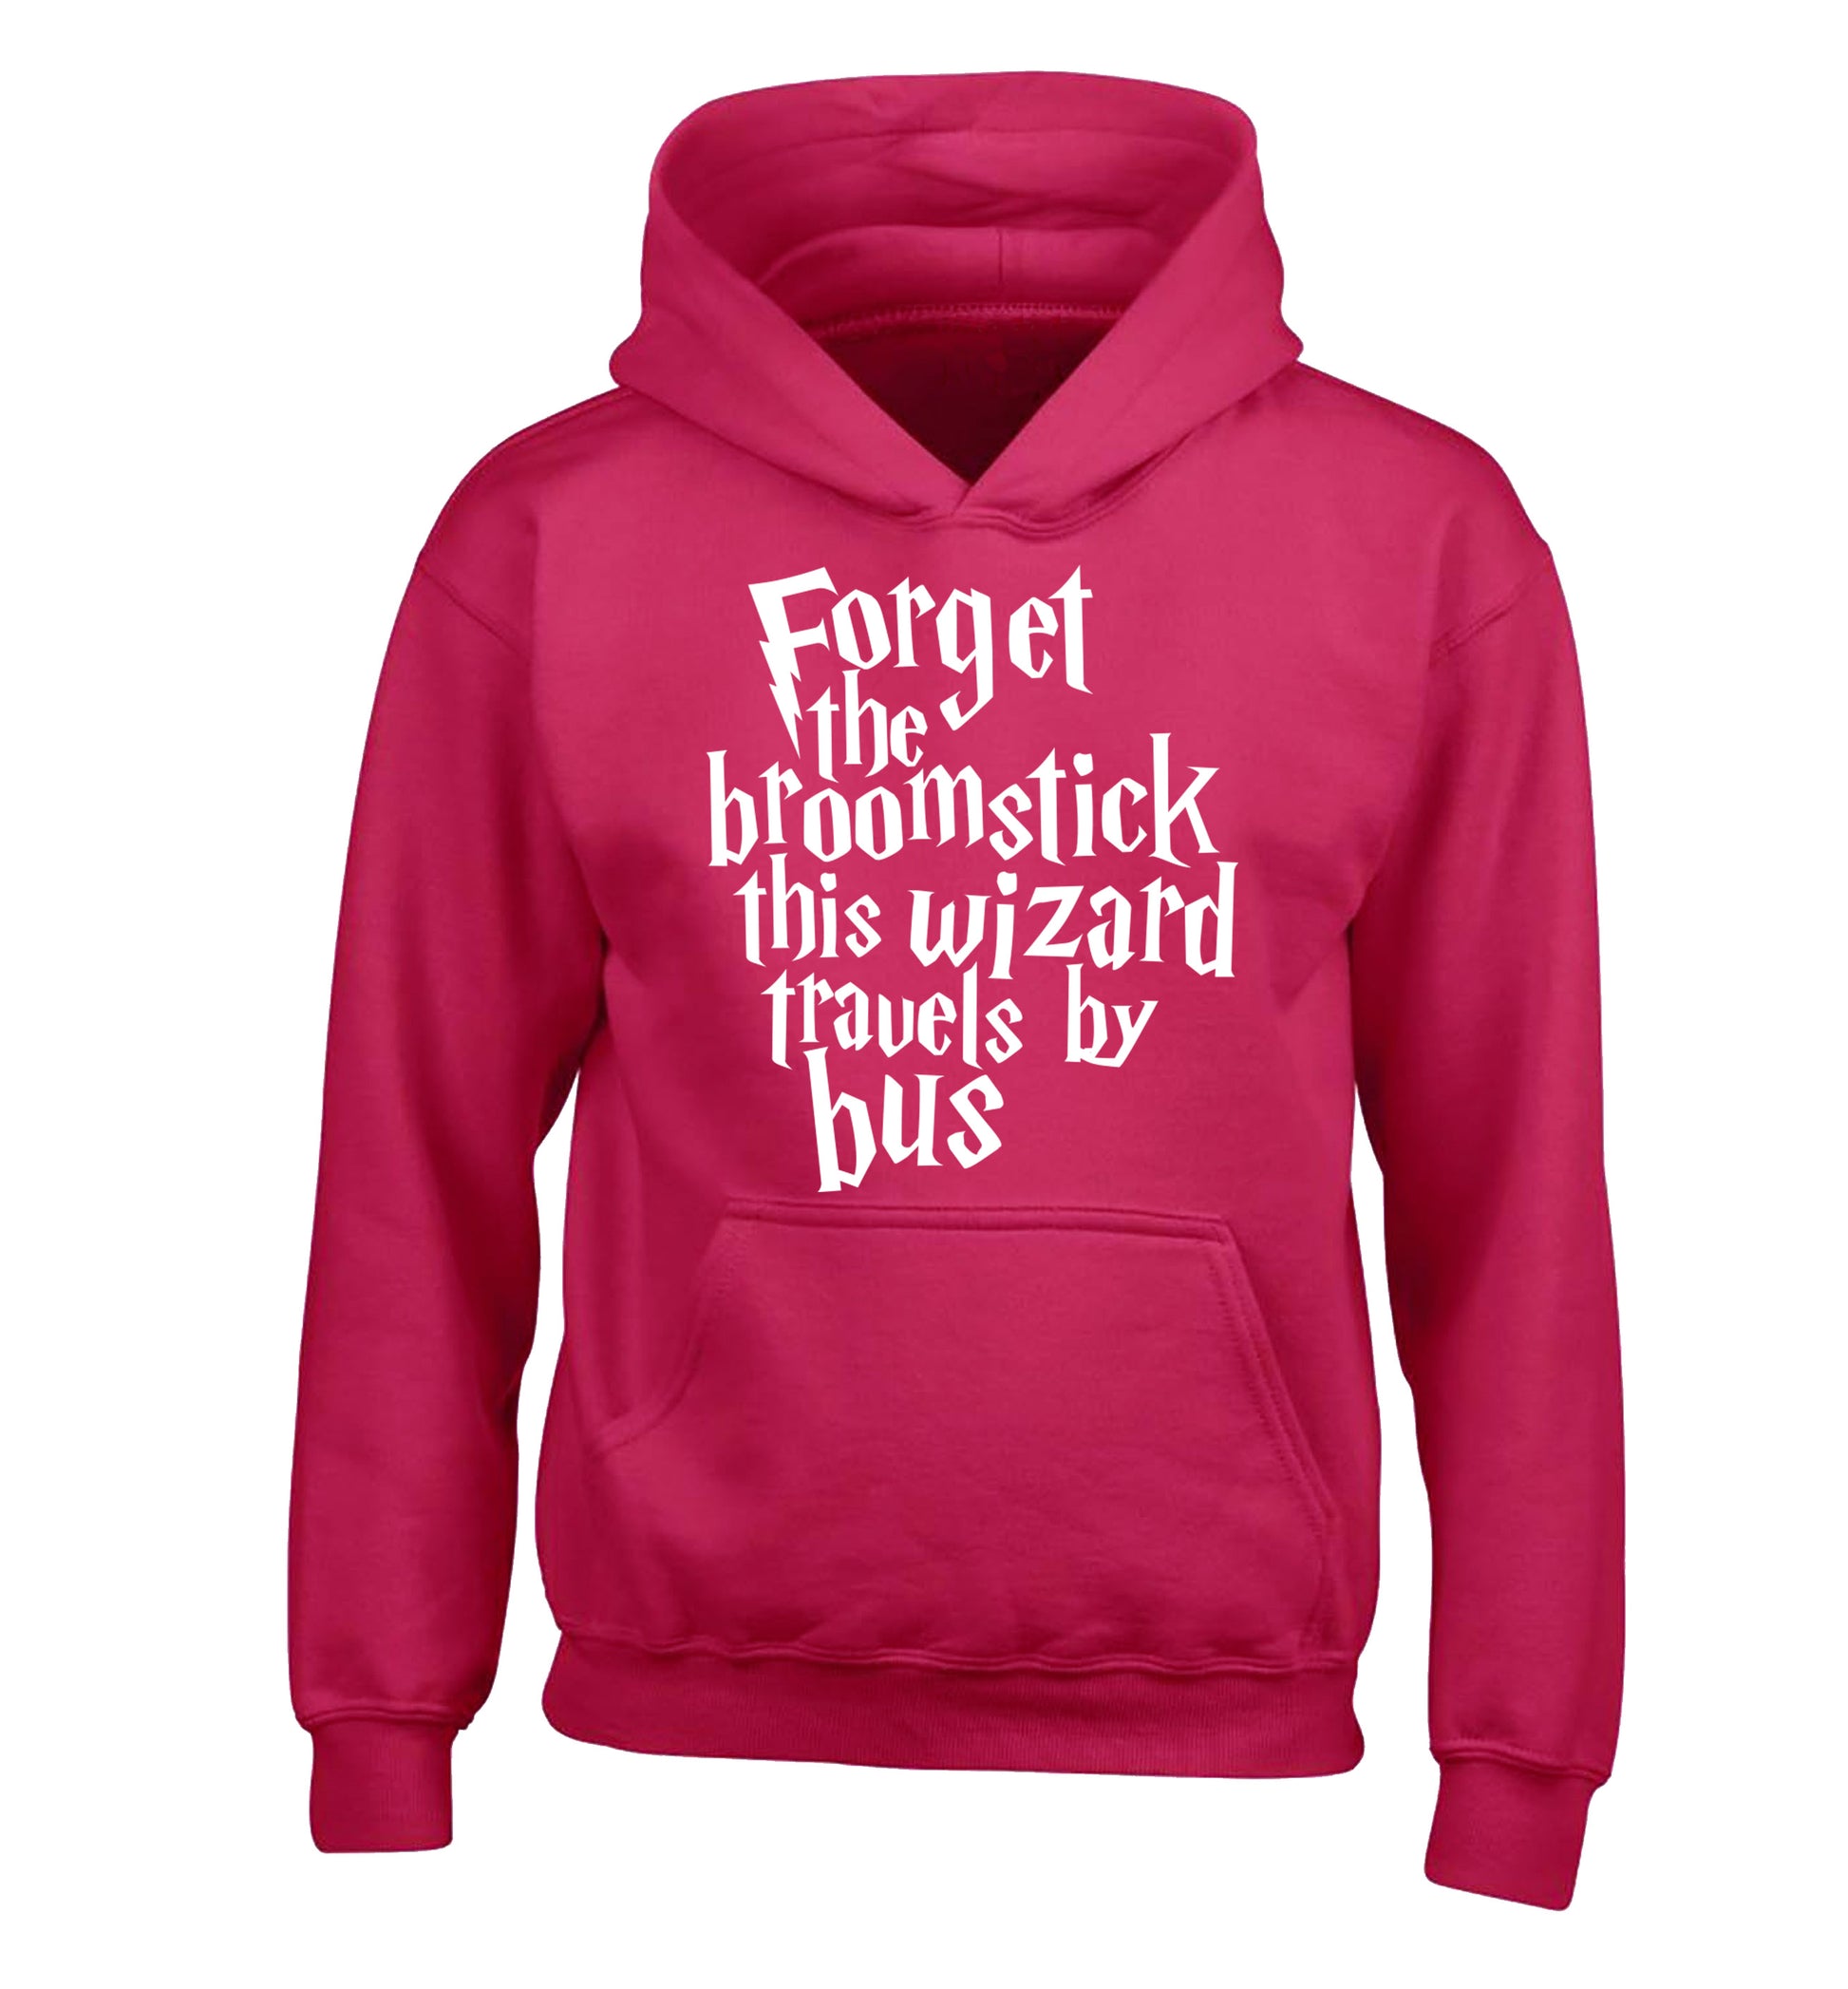 Forget the broomstick this wizard travels by bus children's pink hoodie 12-14 Years